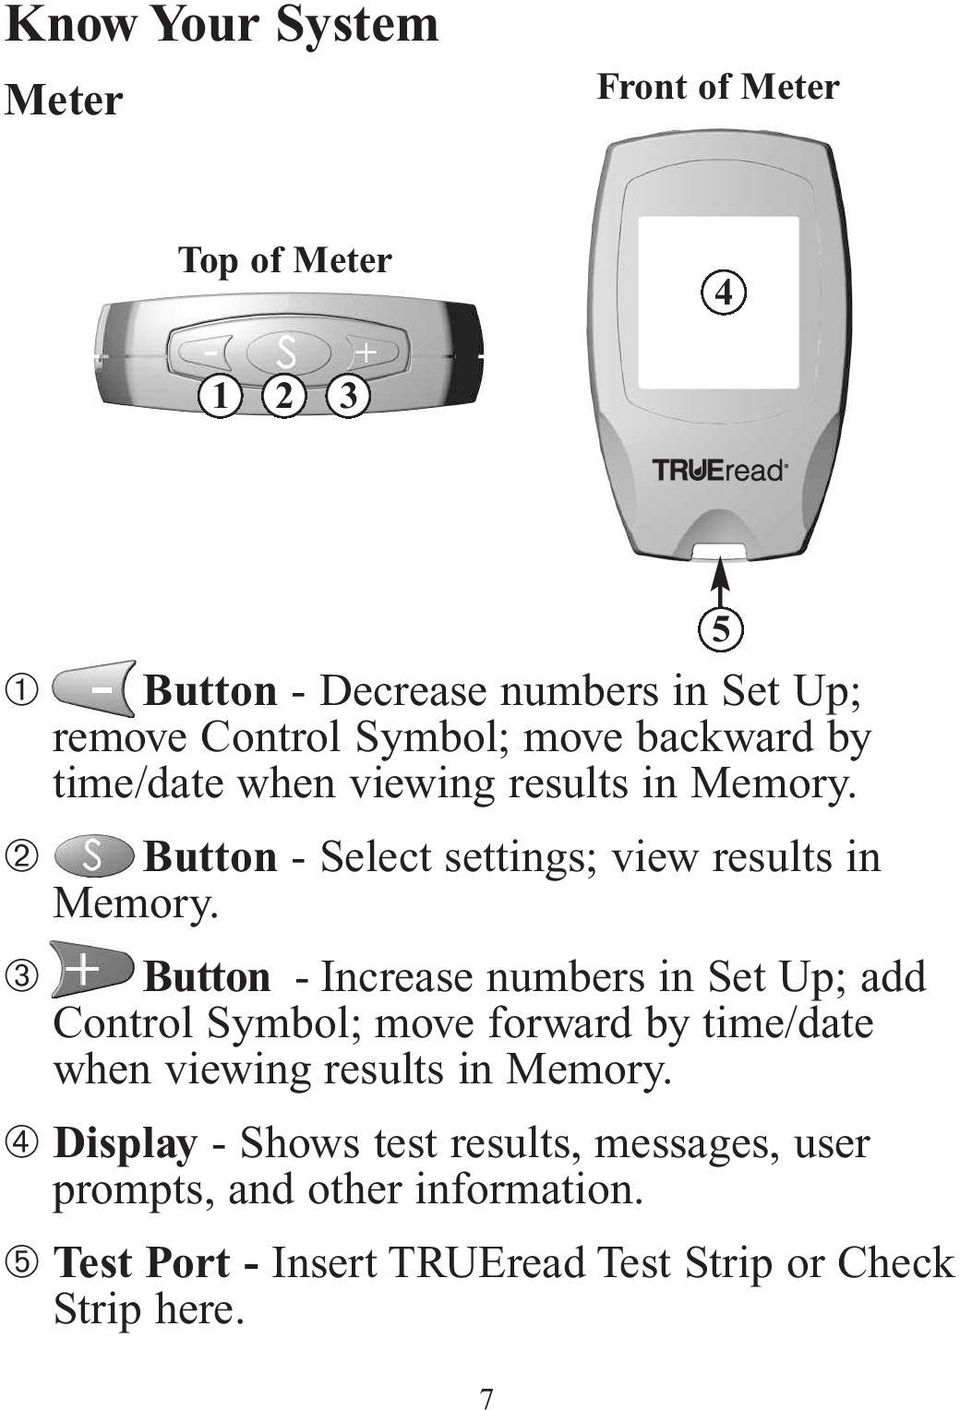 ➂ Button - Increase numbers in Set Up; add Control Symbol; move forward by time/date when viewing results in Memory.